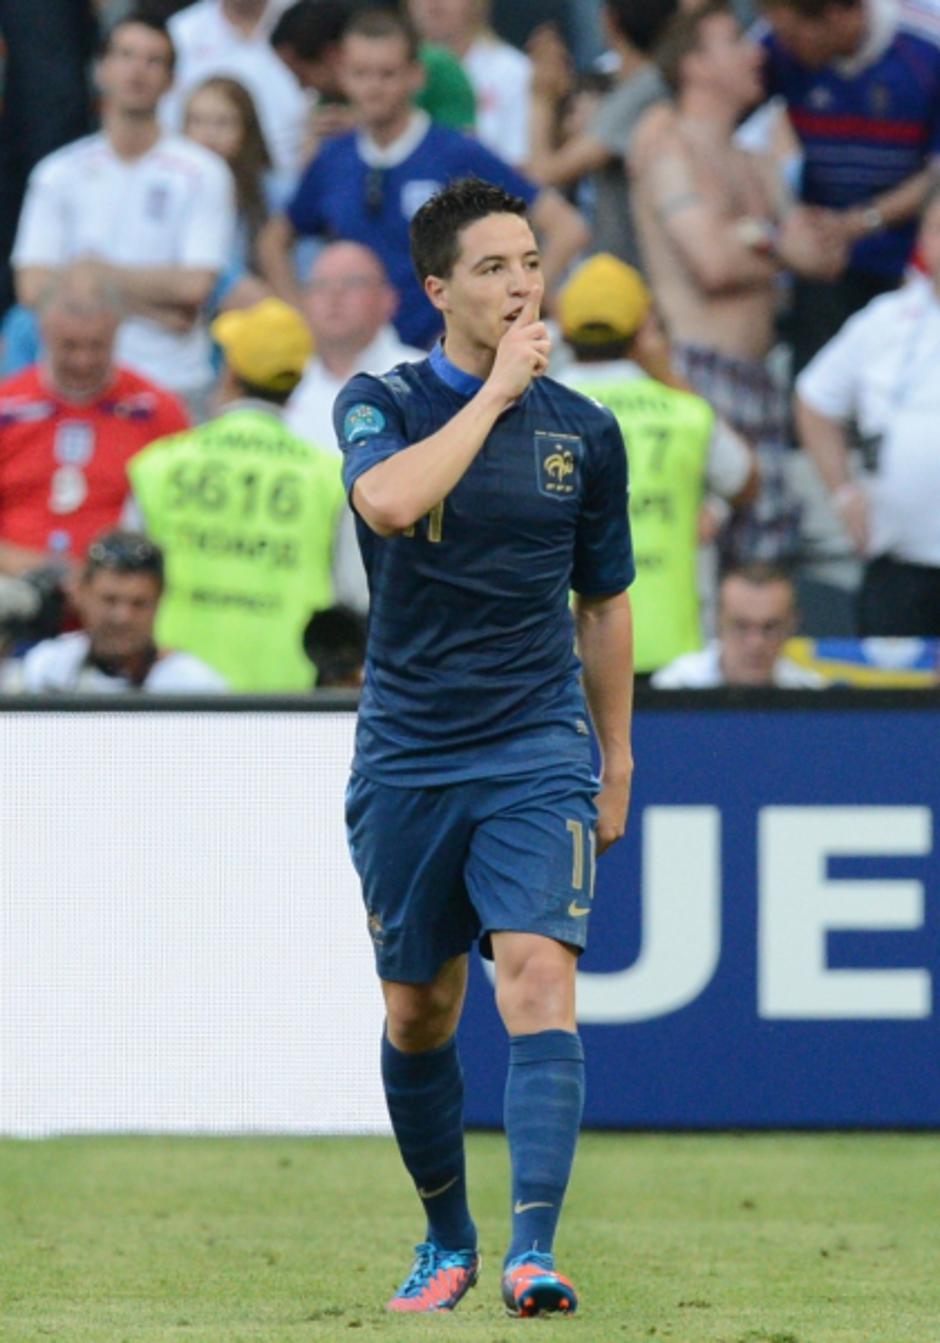 'French midfielder Samir Nasri gestures after scoring a goal during the Euro 2012 championships football match France vs England on June 11, 2012 at the Donbass Arena in Donetsk. AFP PHOTO / PATRICK H